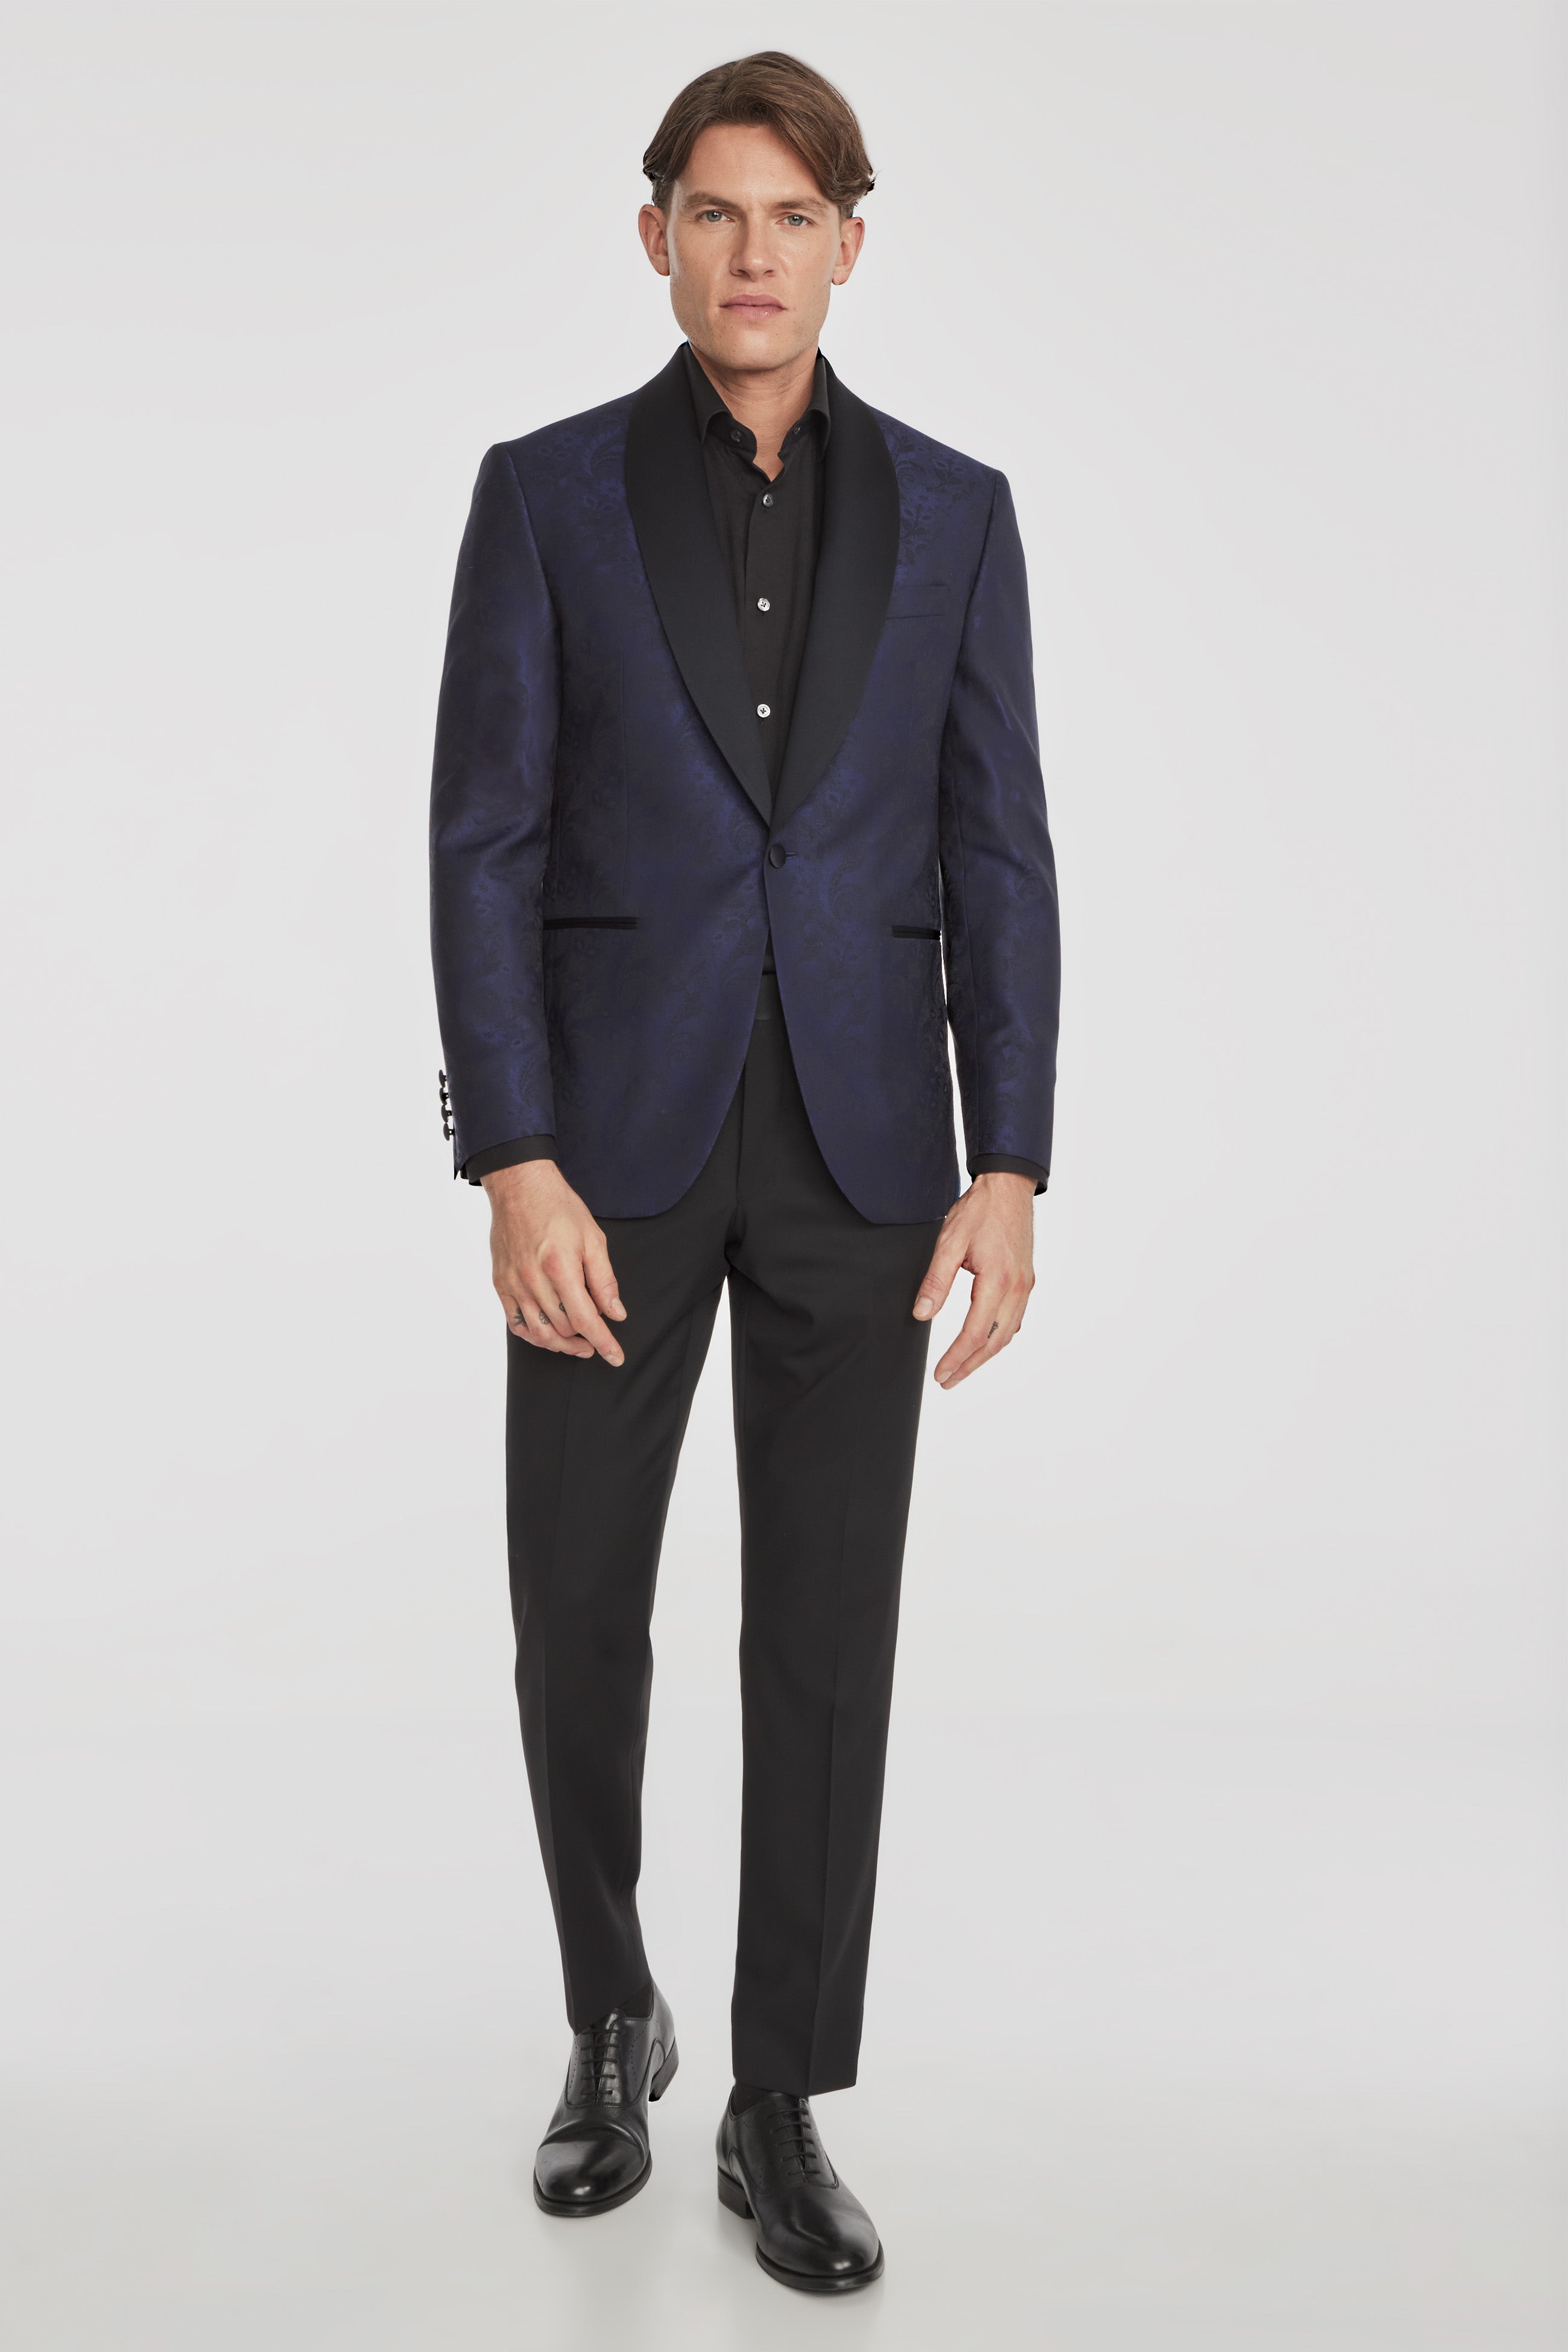 Alt view 5 Ethan Floral Shawl Collar Dinner Jacket in Navy